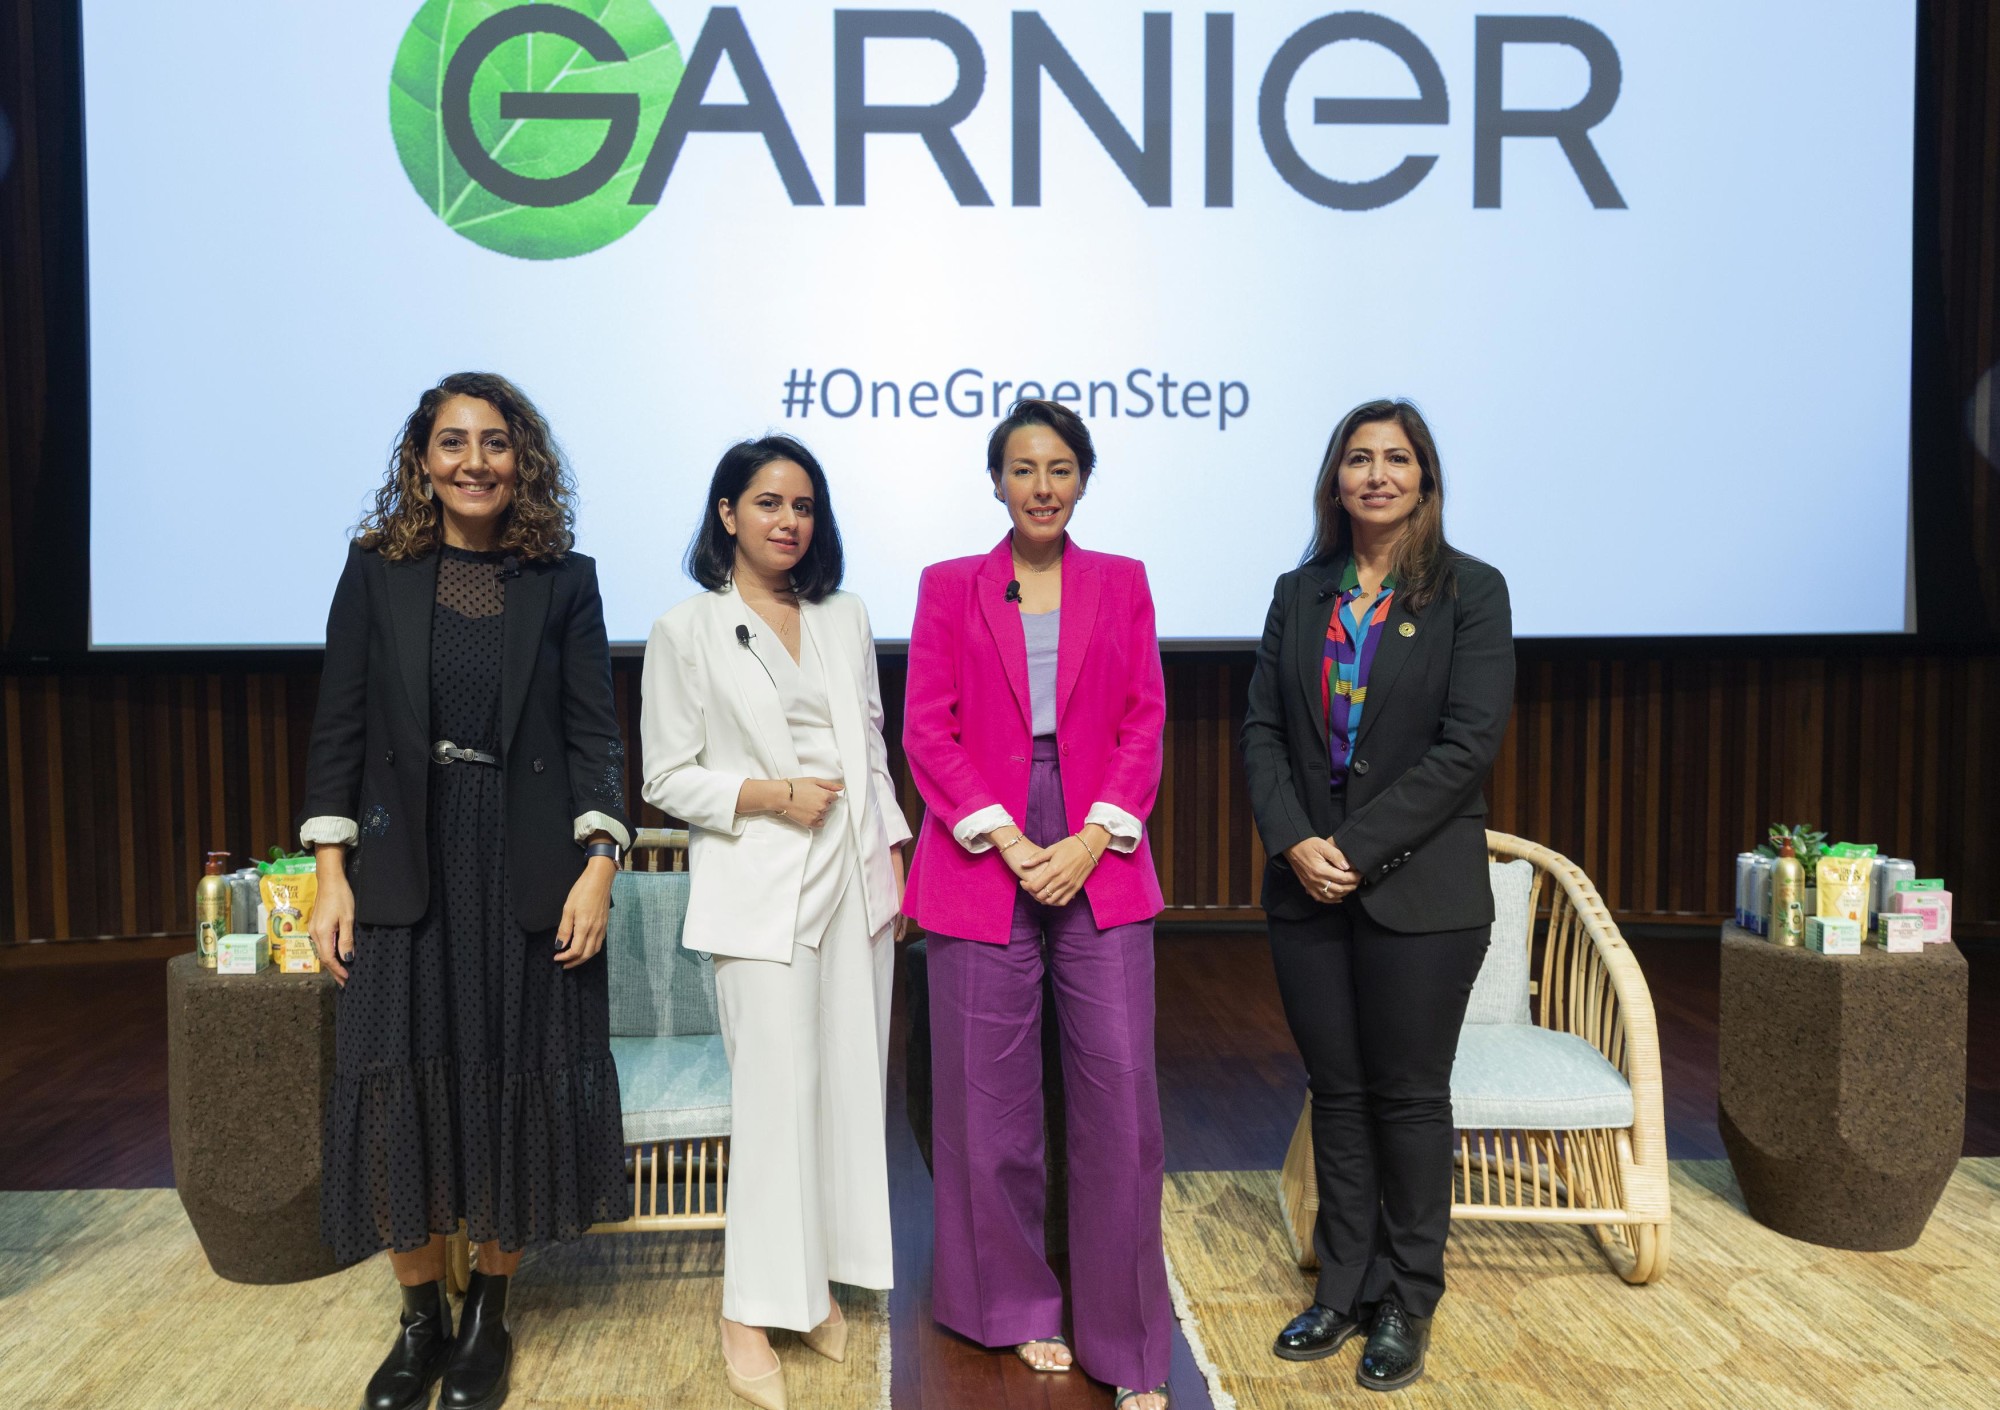 A group photo with Dina Story (R1), Director of Sustainability Operations at Expo 2020 Dubai, Mariam Farag, Brand Humanity (L1), media & communications strategist, CEO & Founder of Humanizing Brands, Najia Qazi (L2), Sustainability advocte a